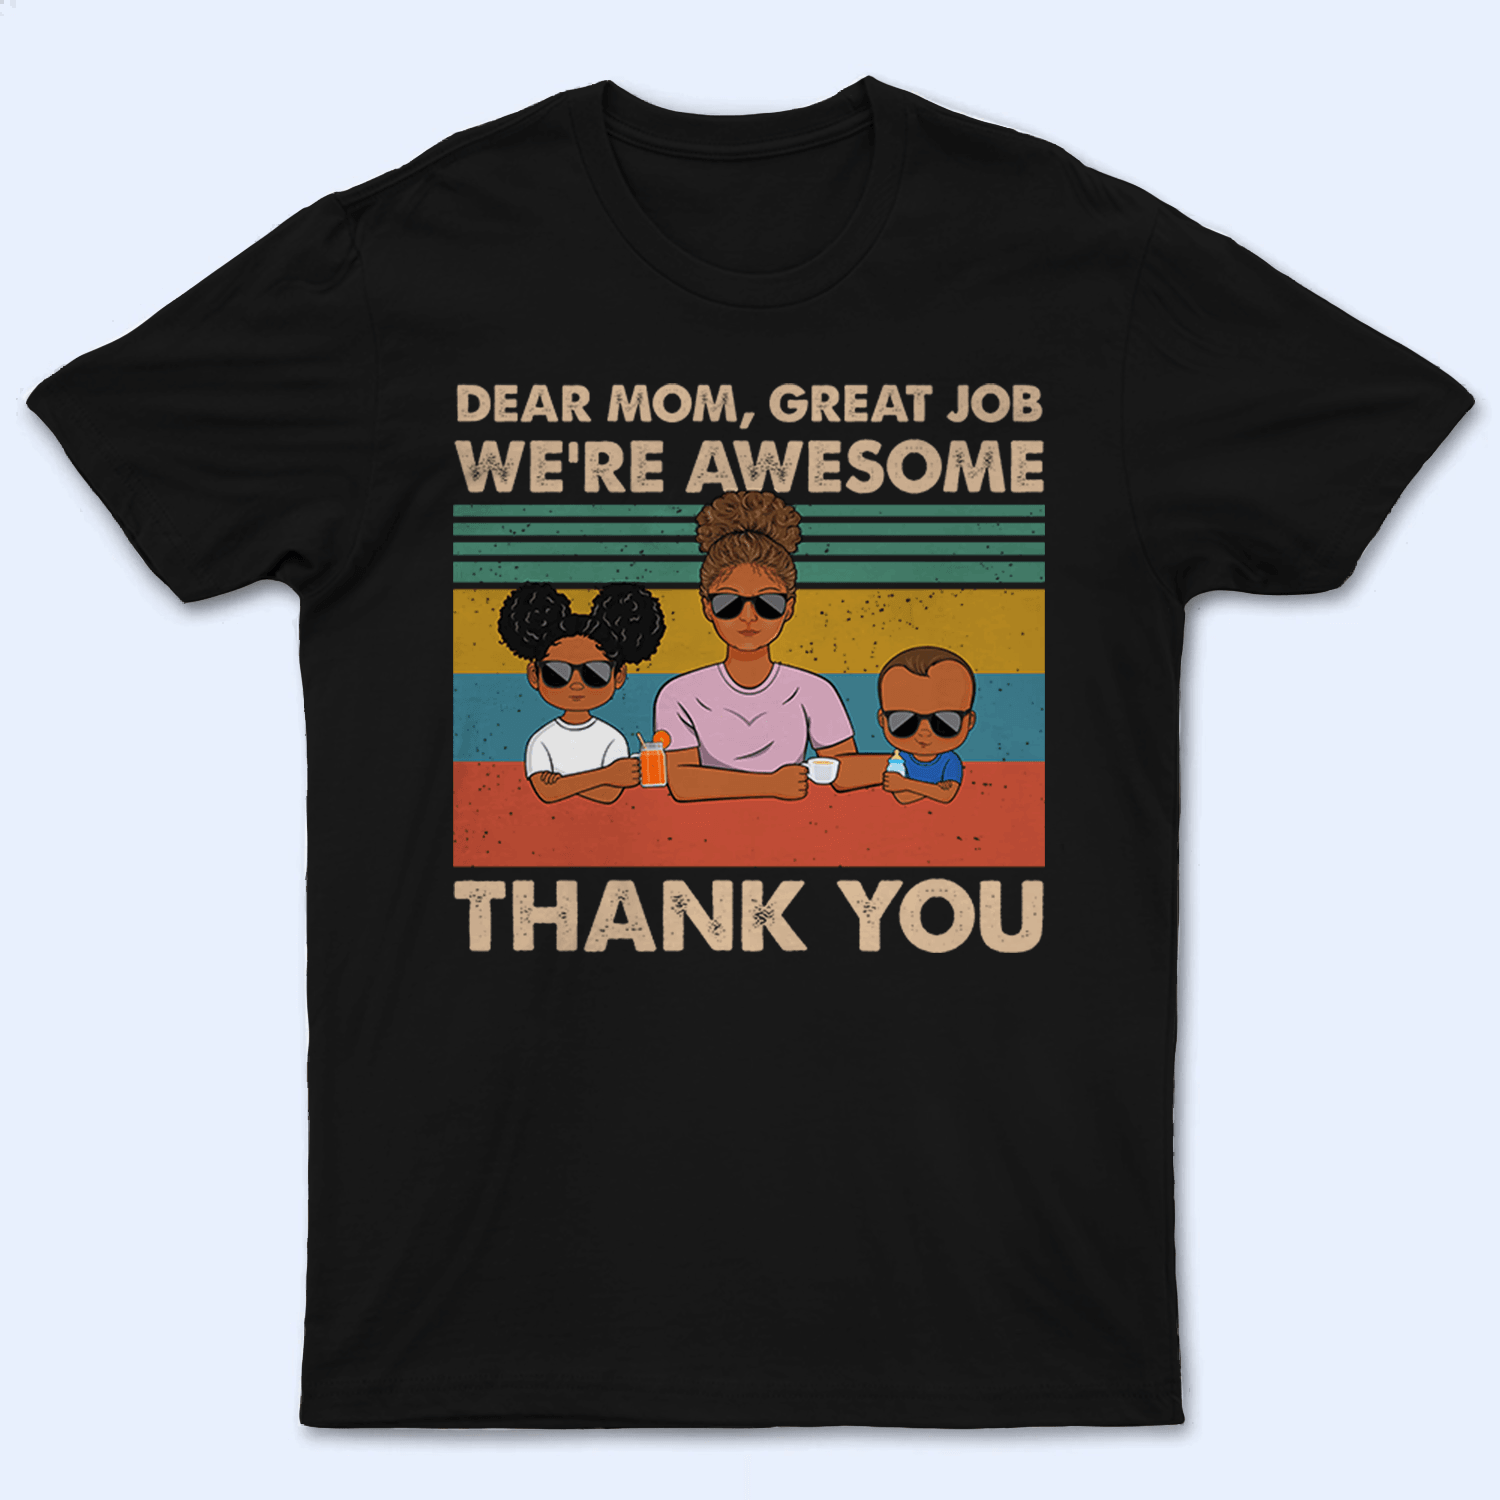 Dear Mom, Great Job We're Awesome Thank You - Personalized Custom T-Shirt - Gift For Mom, Mother, Grandma, Grandmother, Mother's Day - Suzitee Store